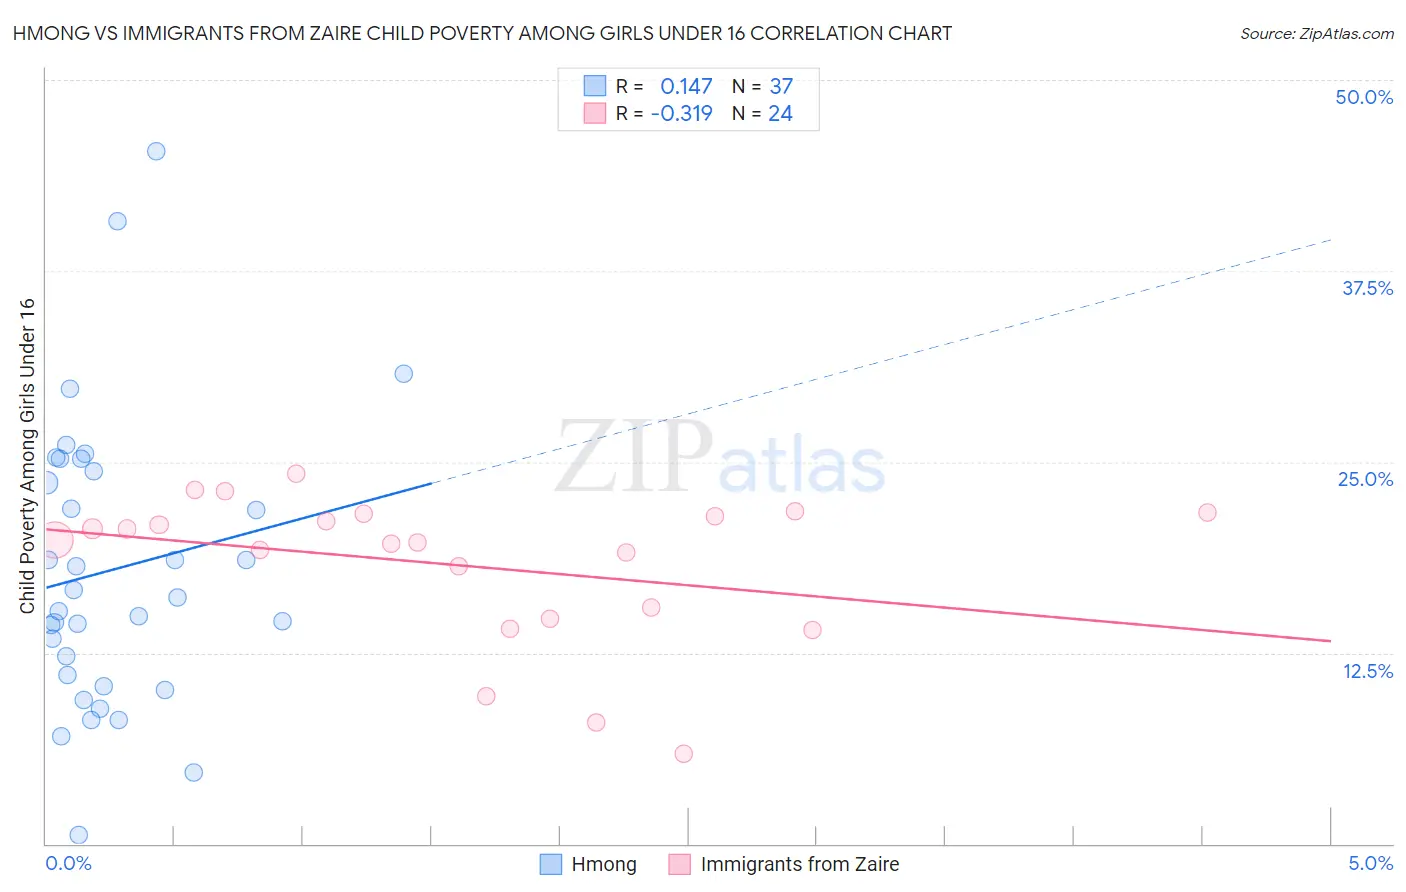 Hmong vs Immigrants from Zaire Child Poverty Among Girls Under 16